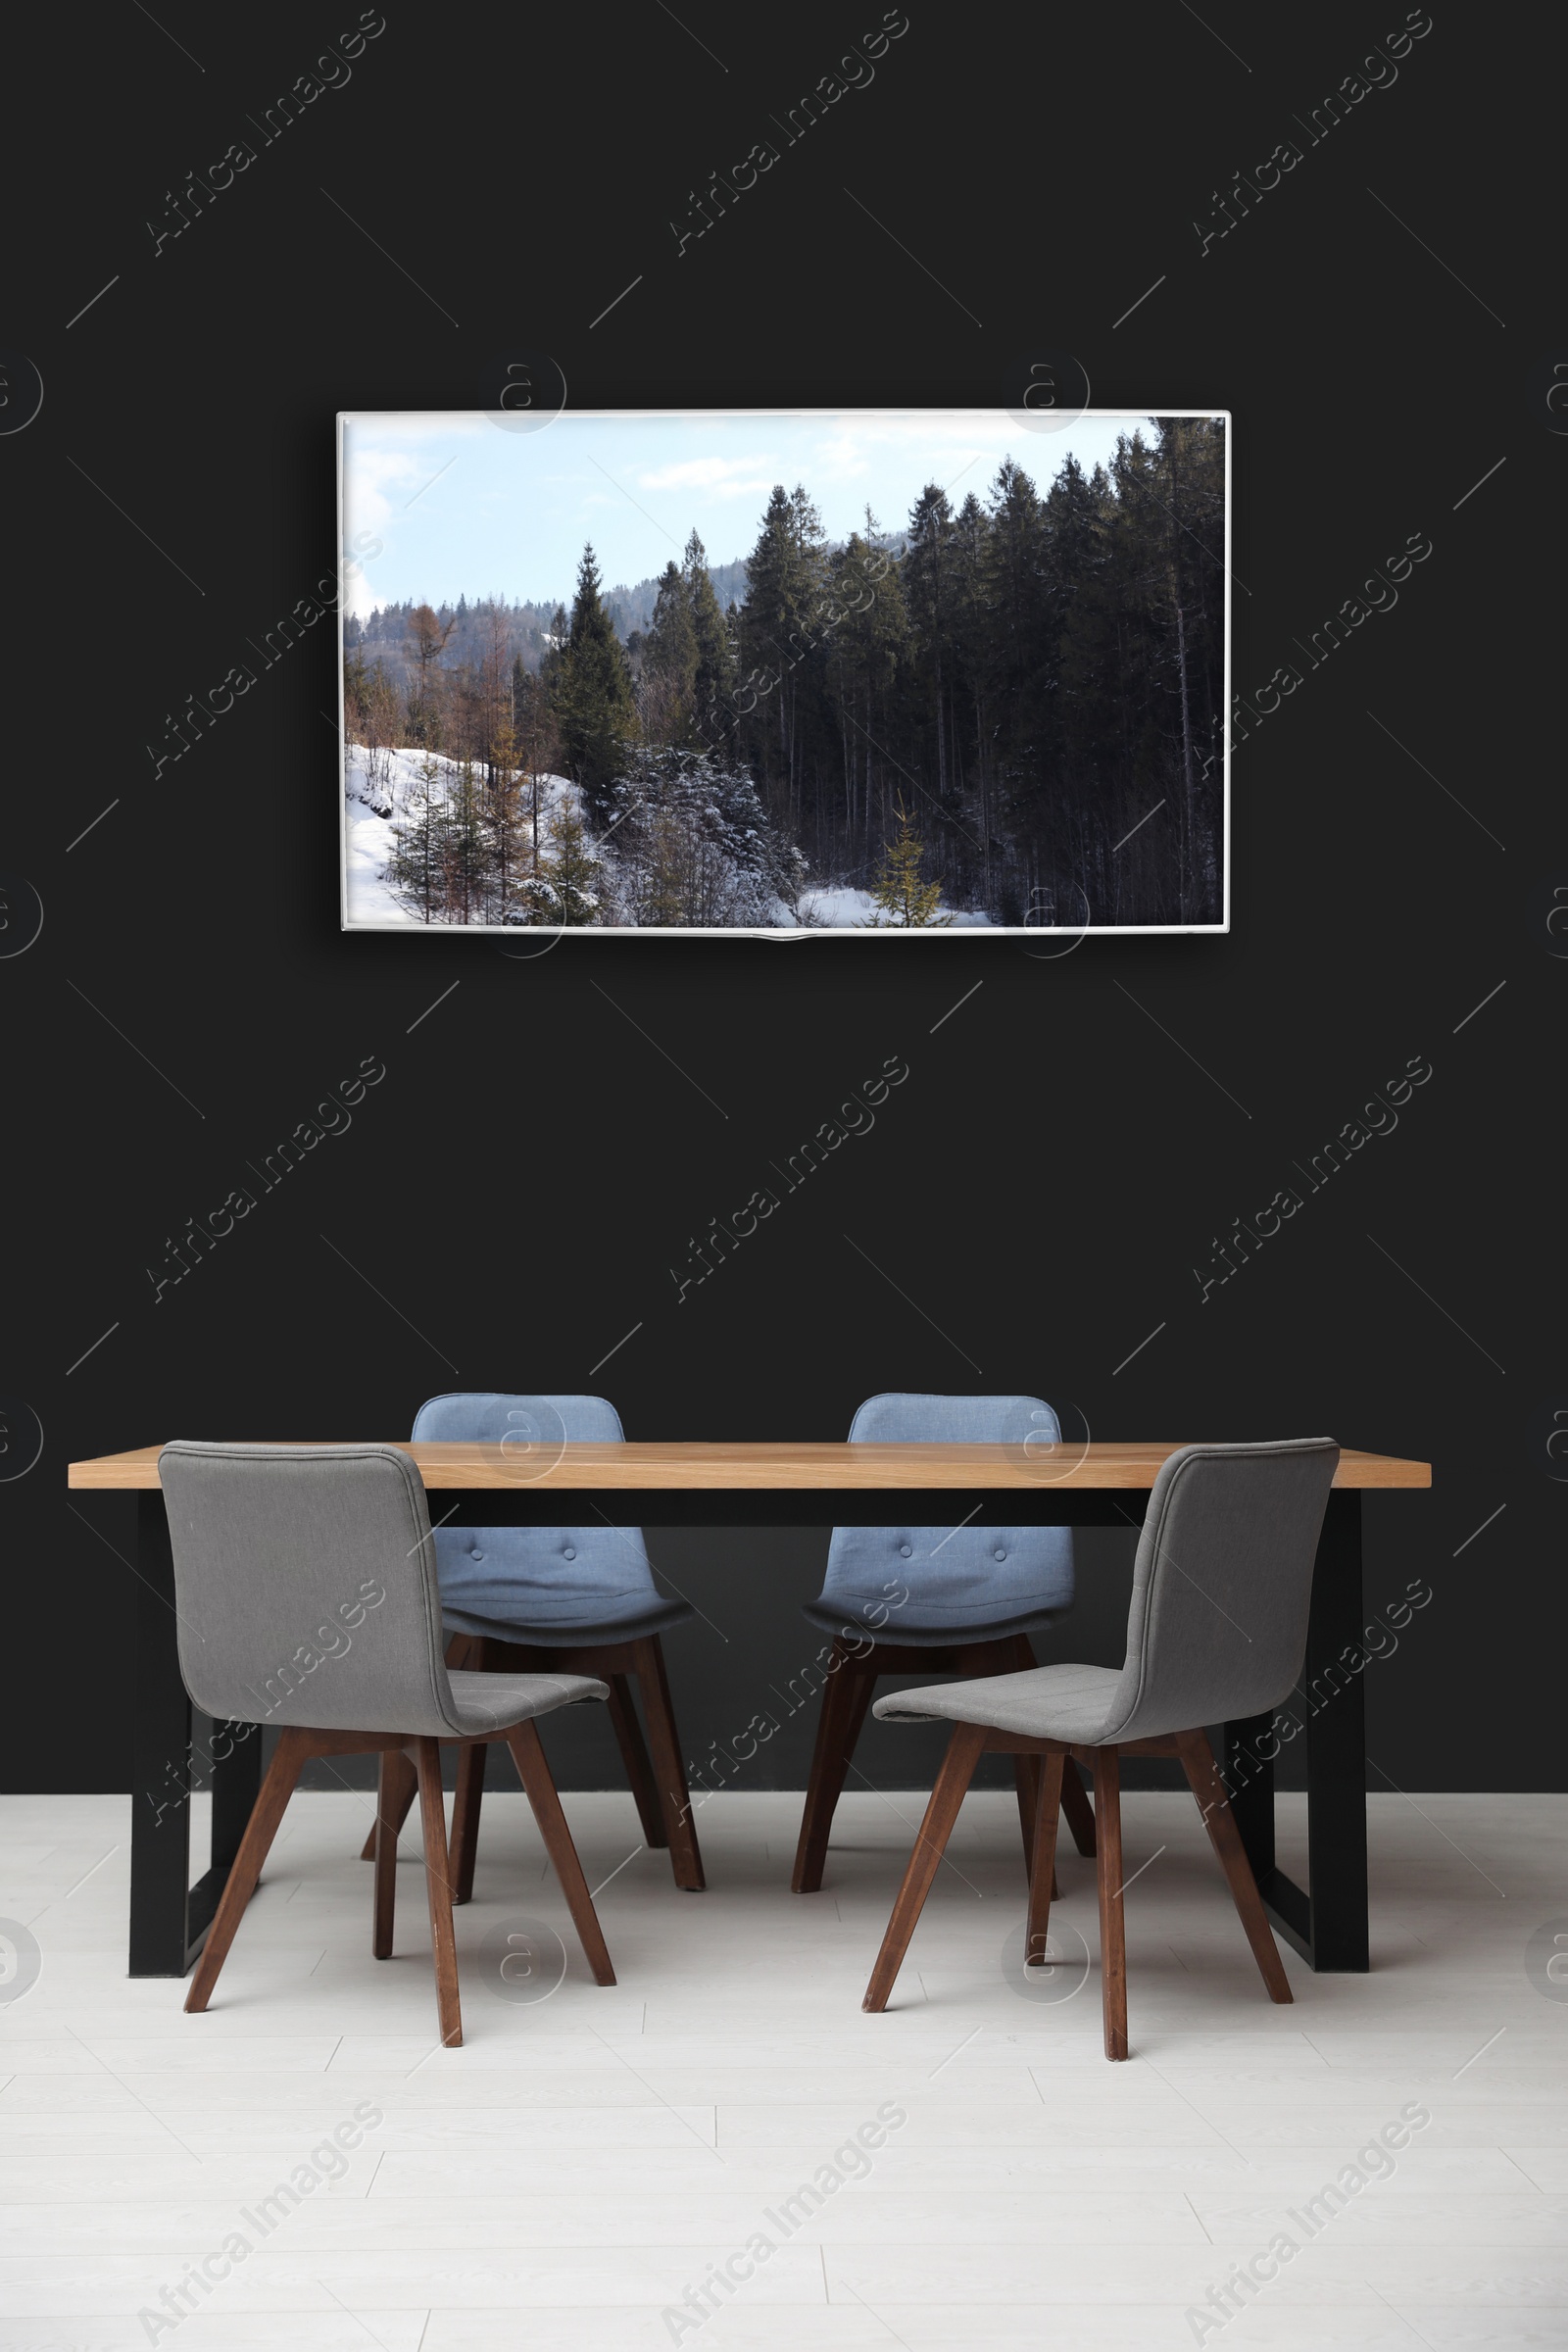 Image of Modern wide screen TV on black wall in room with stylish furniture 